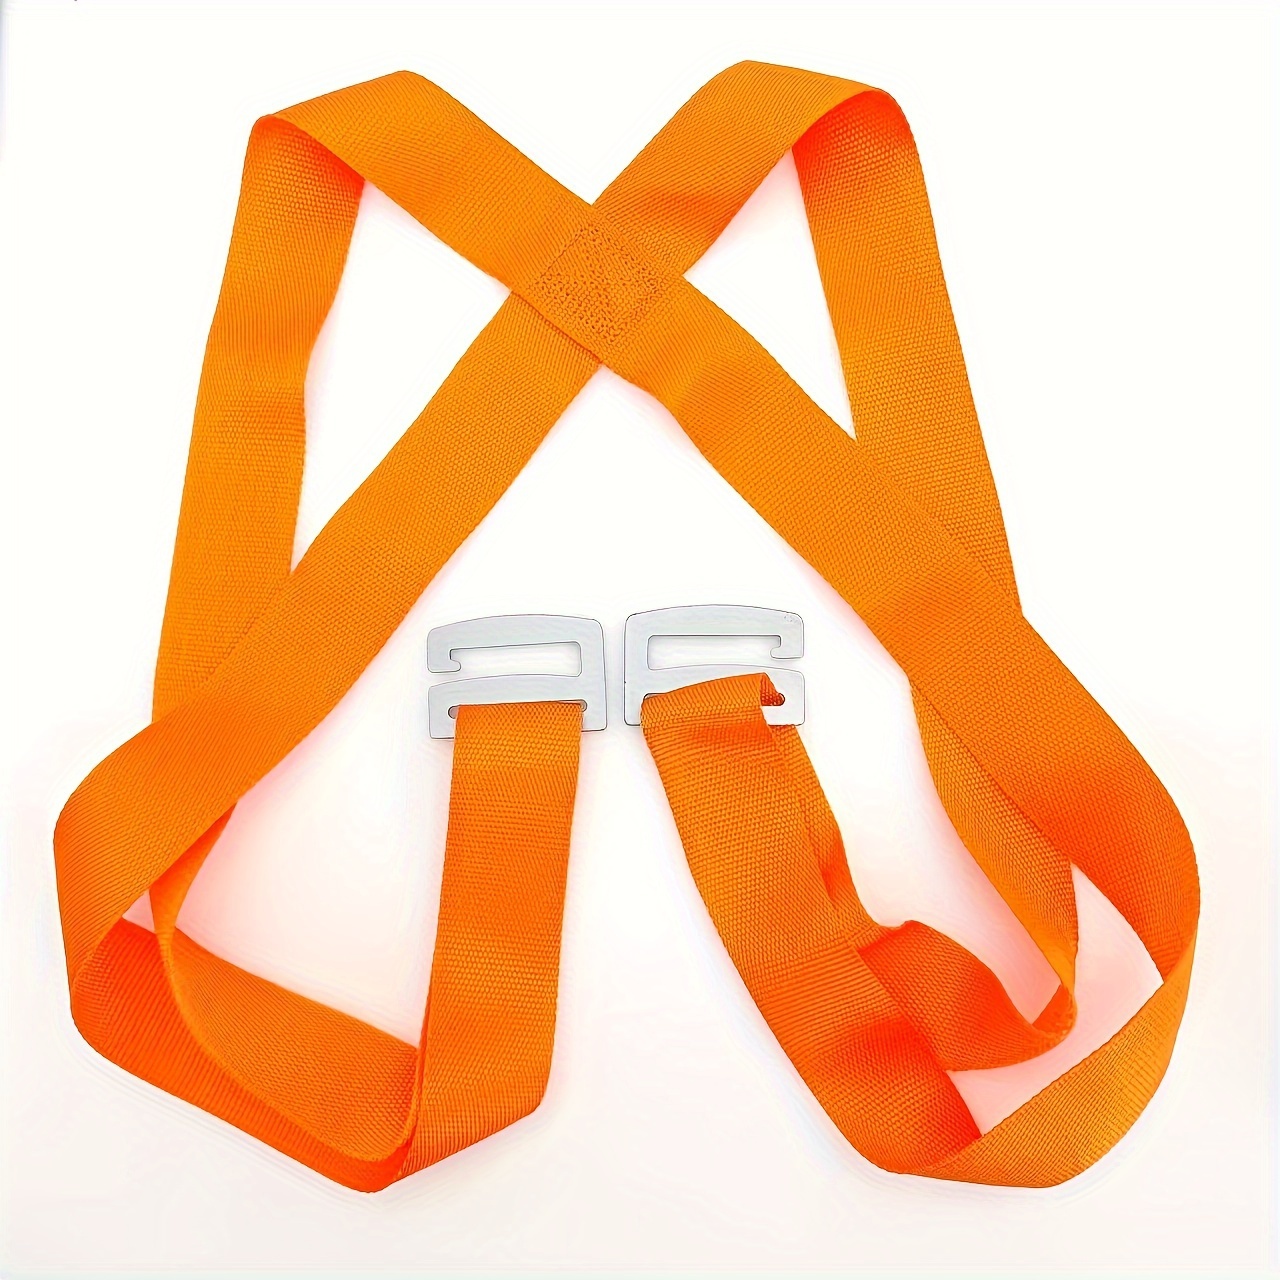 Secure and Organize Heavy Objects Easily with Heavy-Duty Storage Straps